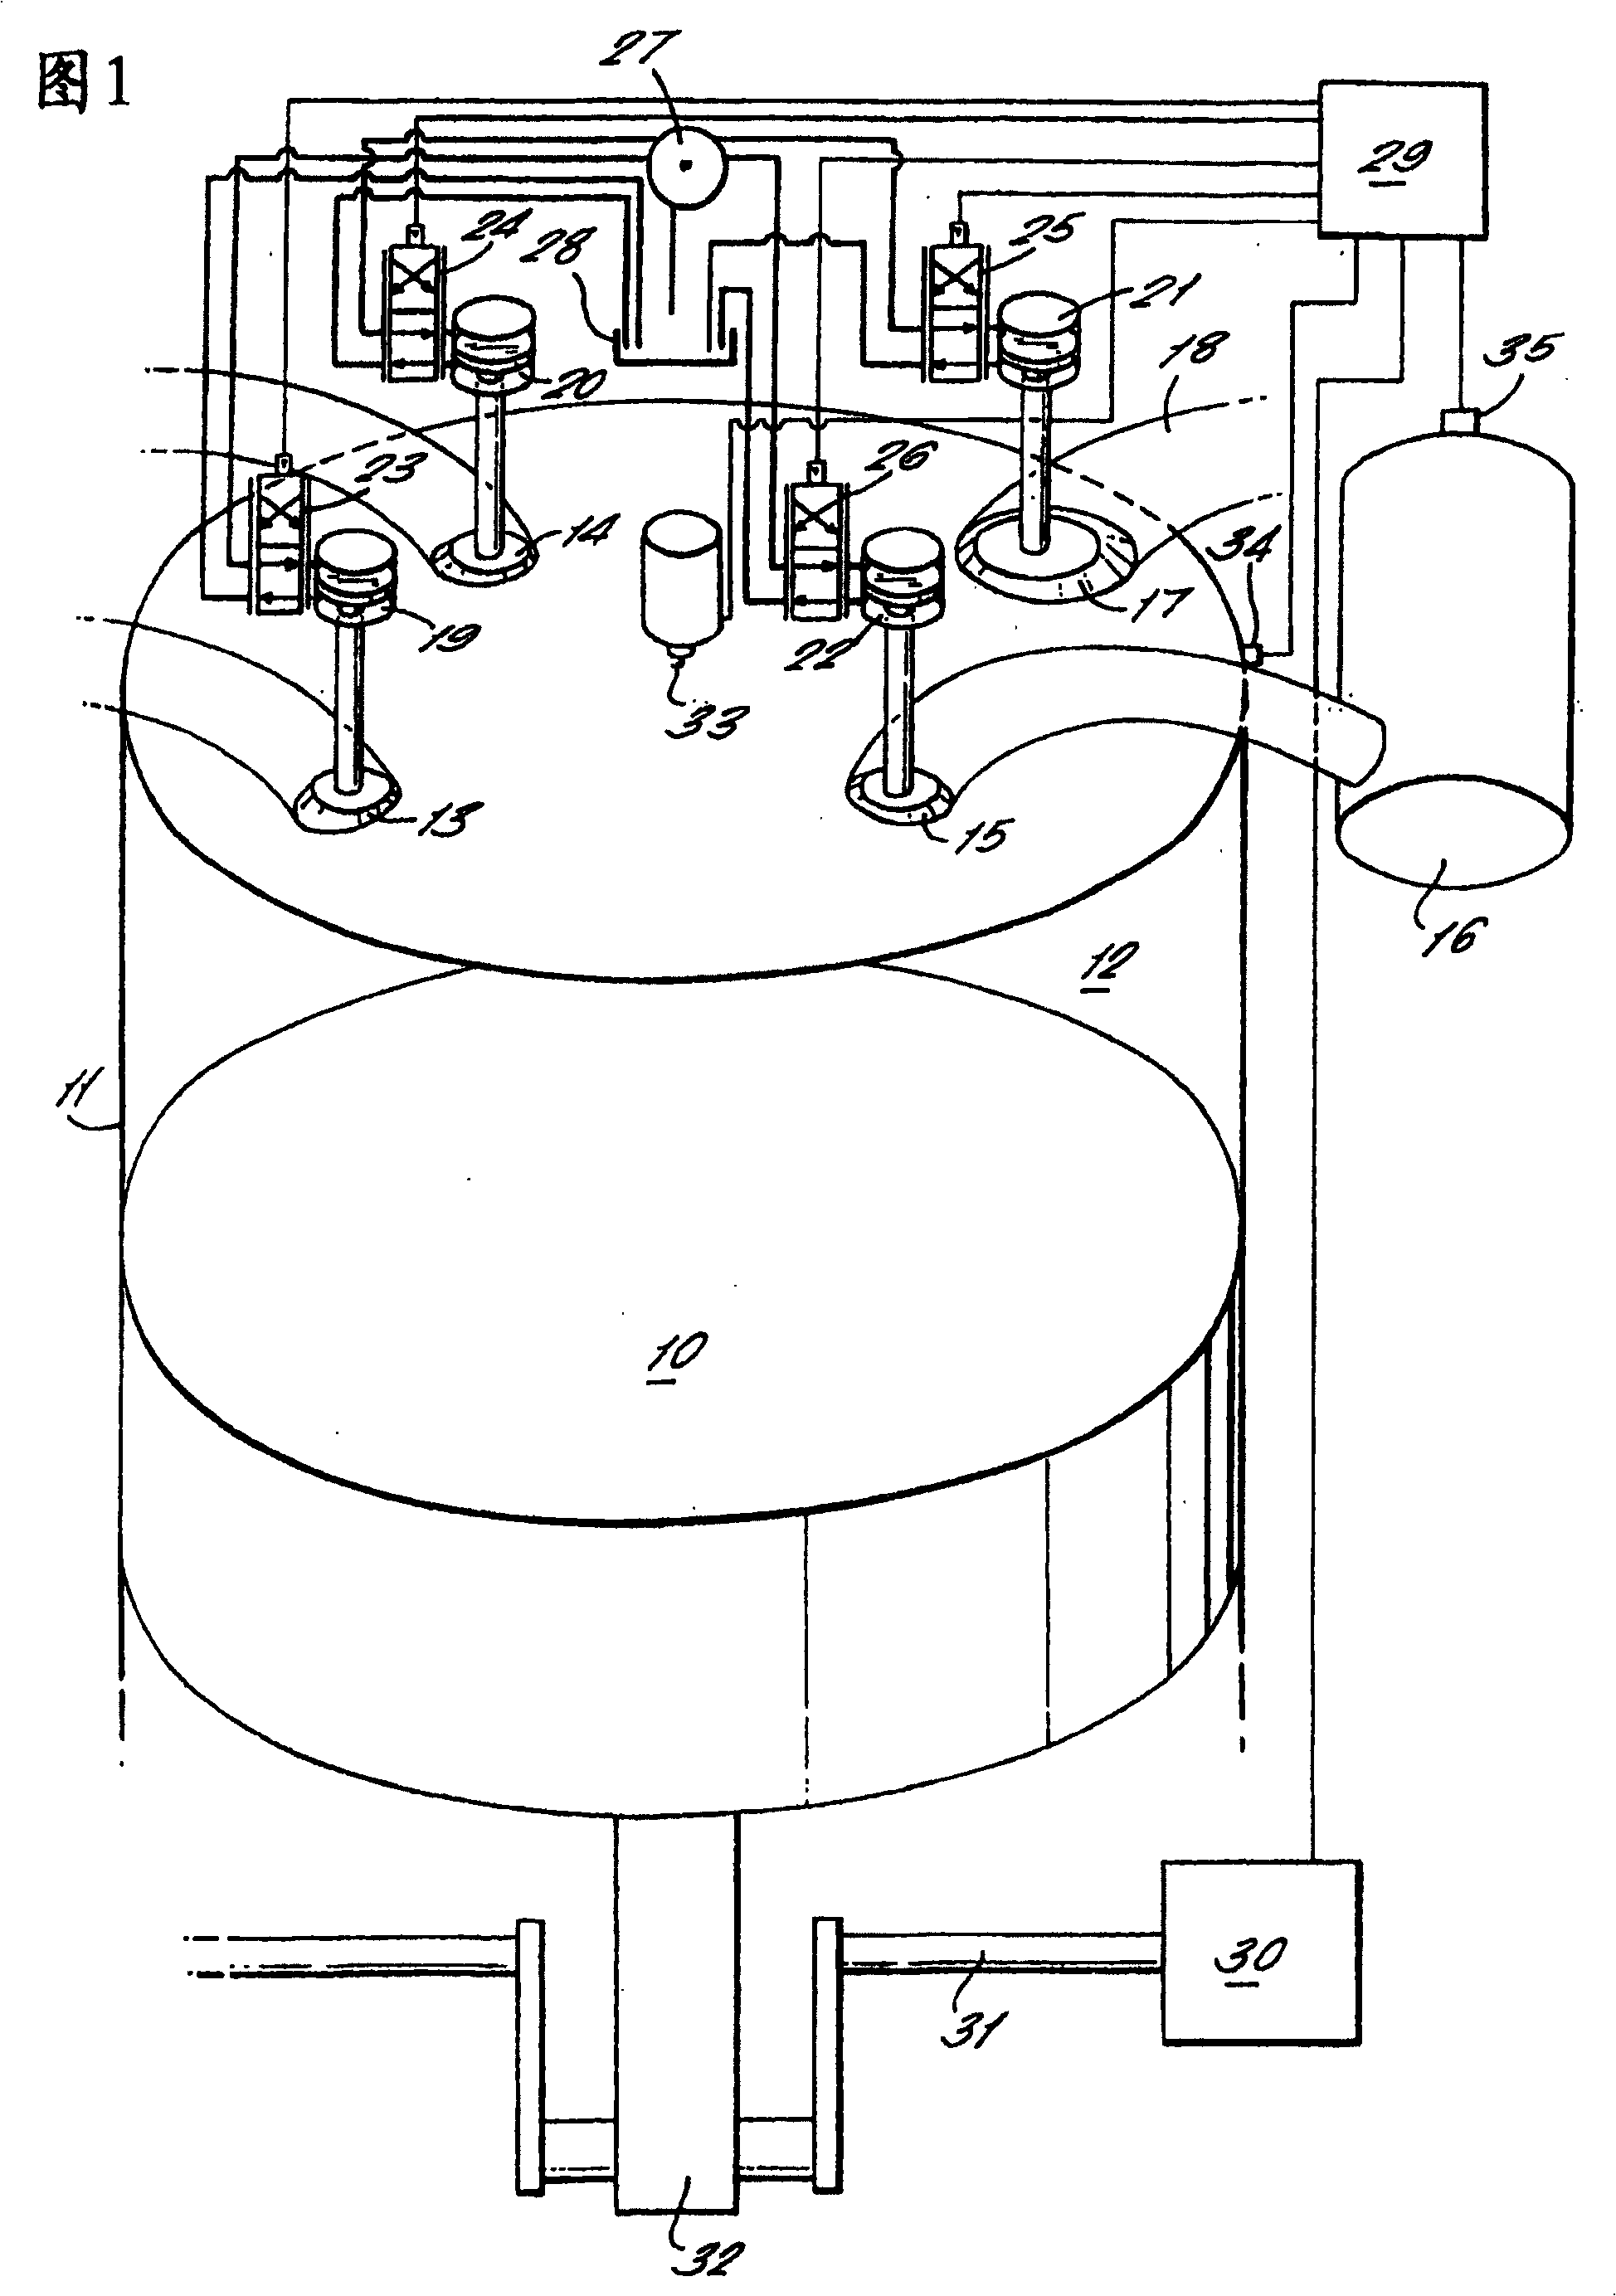 An engine with a plurality of operating modes including operation by compressed air